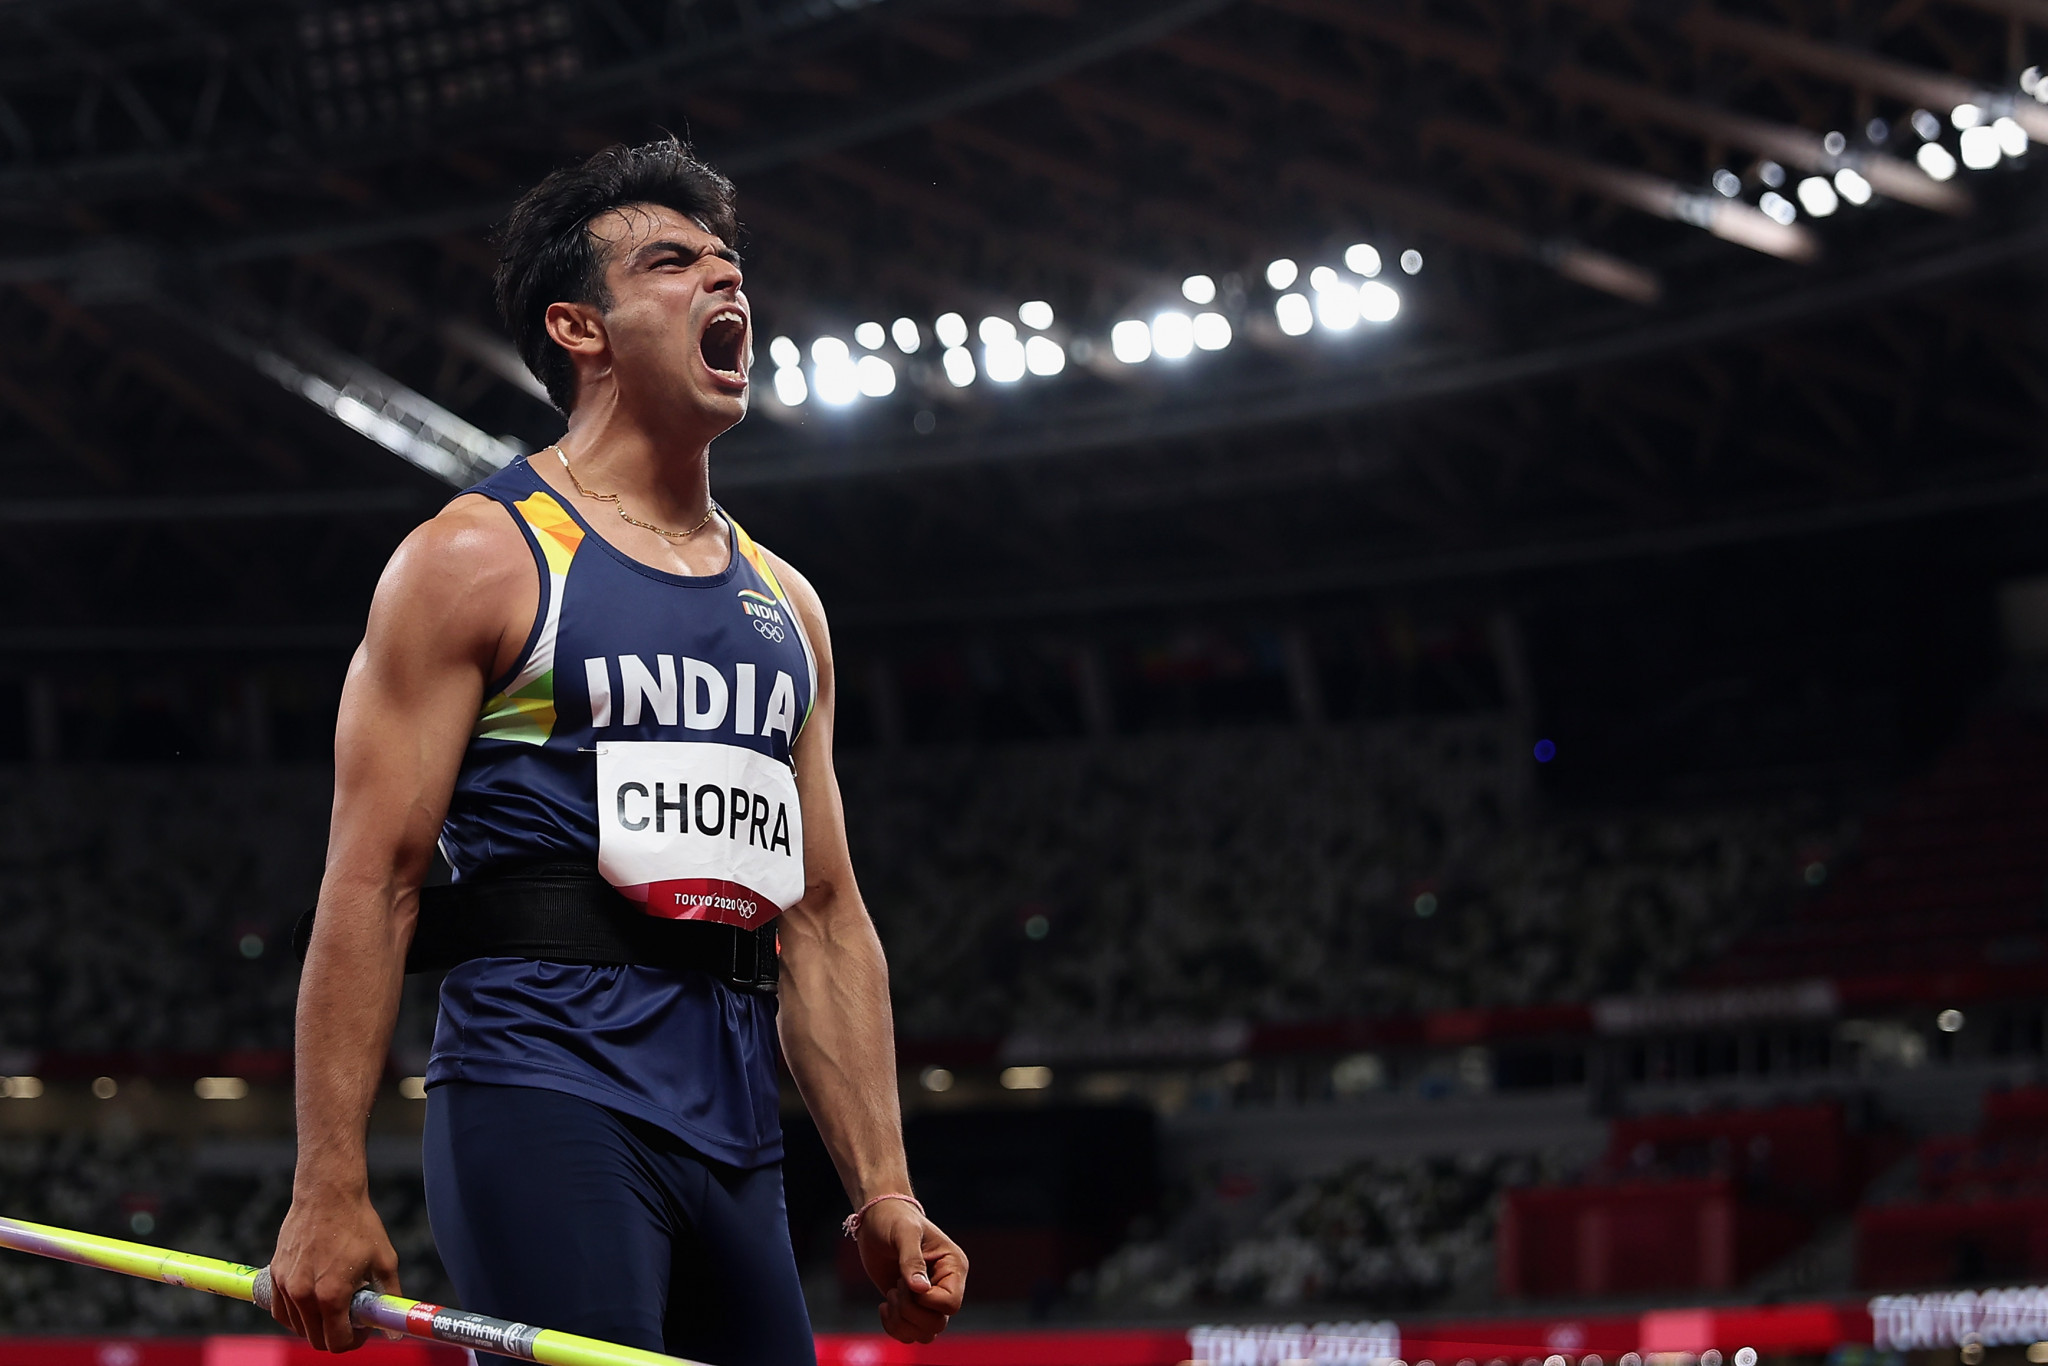 Neeraj Chopra won India's first-ever Olympic track and field gold medal at Tokyo 2020  ©Getty Images